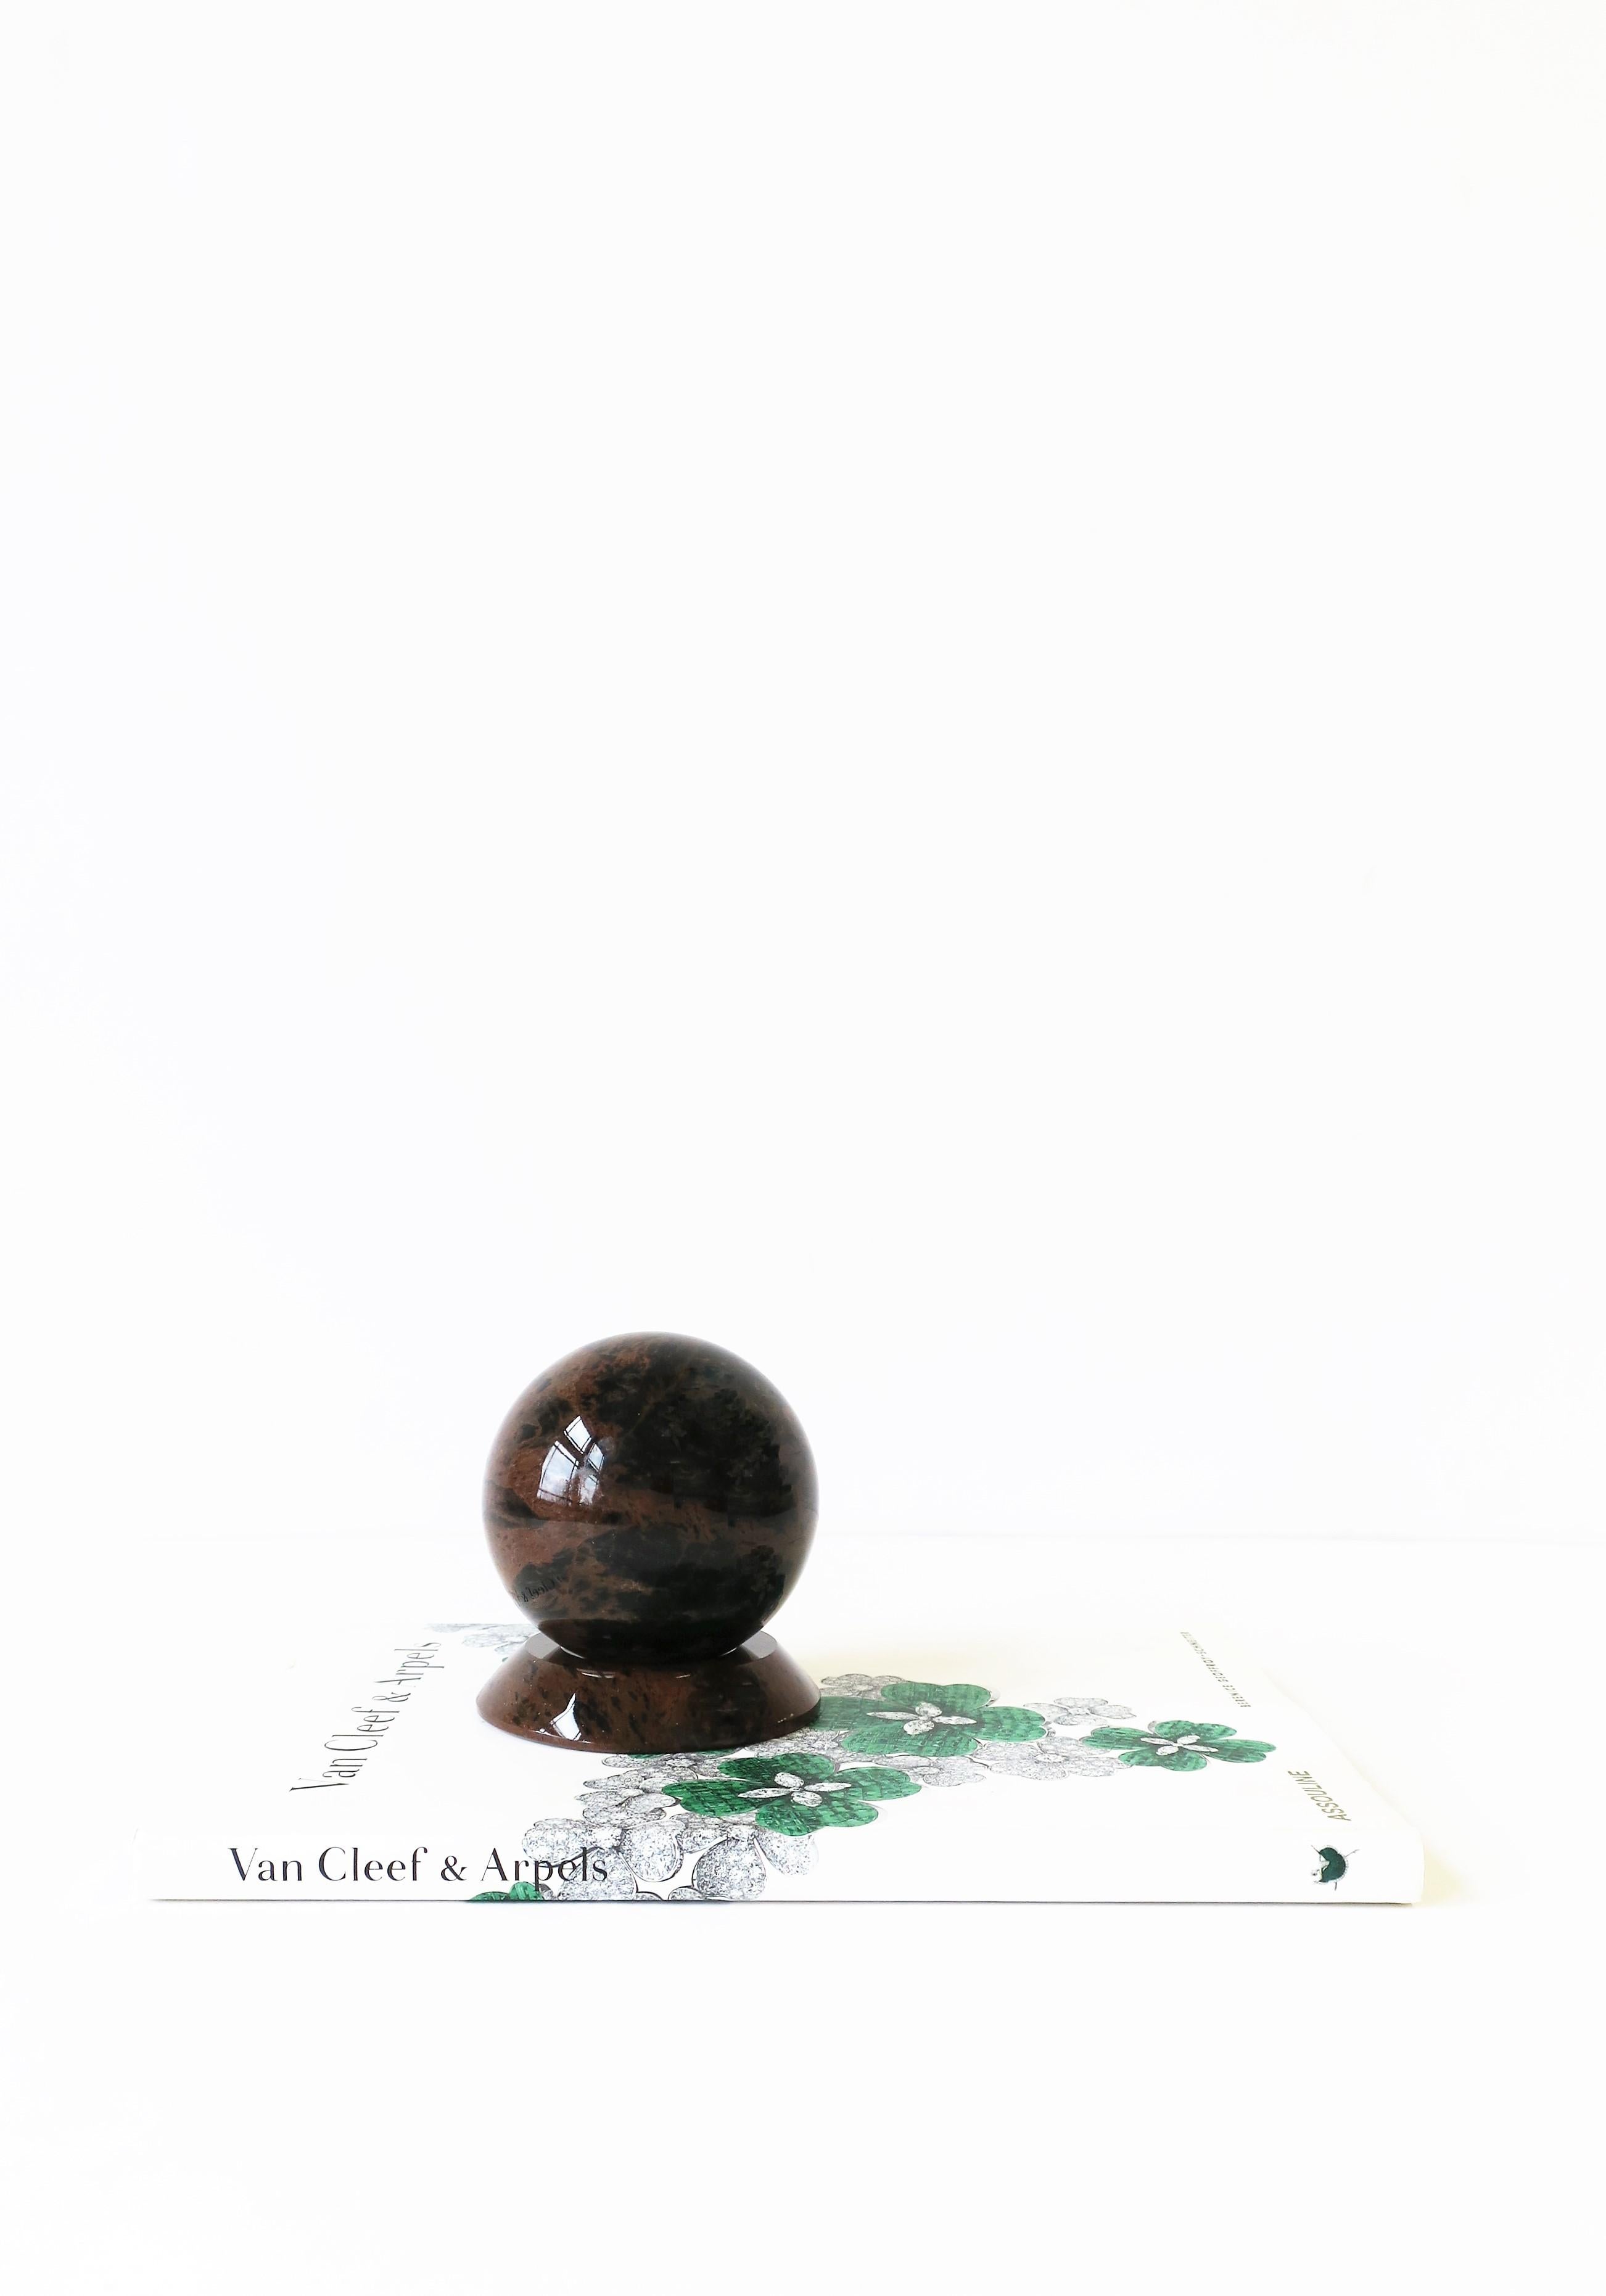 A 1990s Postmodern black and brown polished marble sphere (with base) decorative object or desk accessory, circa 1990s. 

Dimensions: 2.88